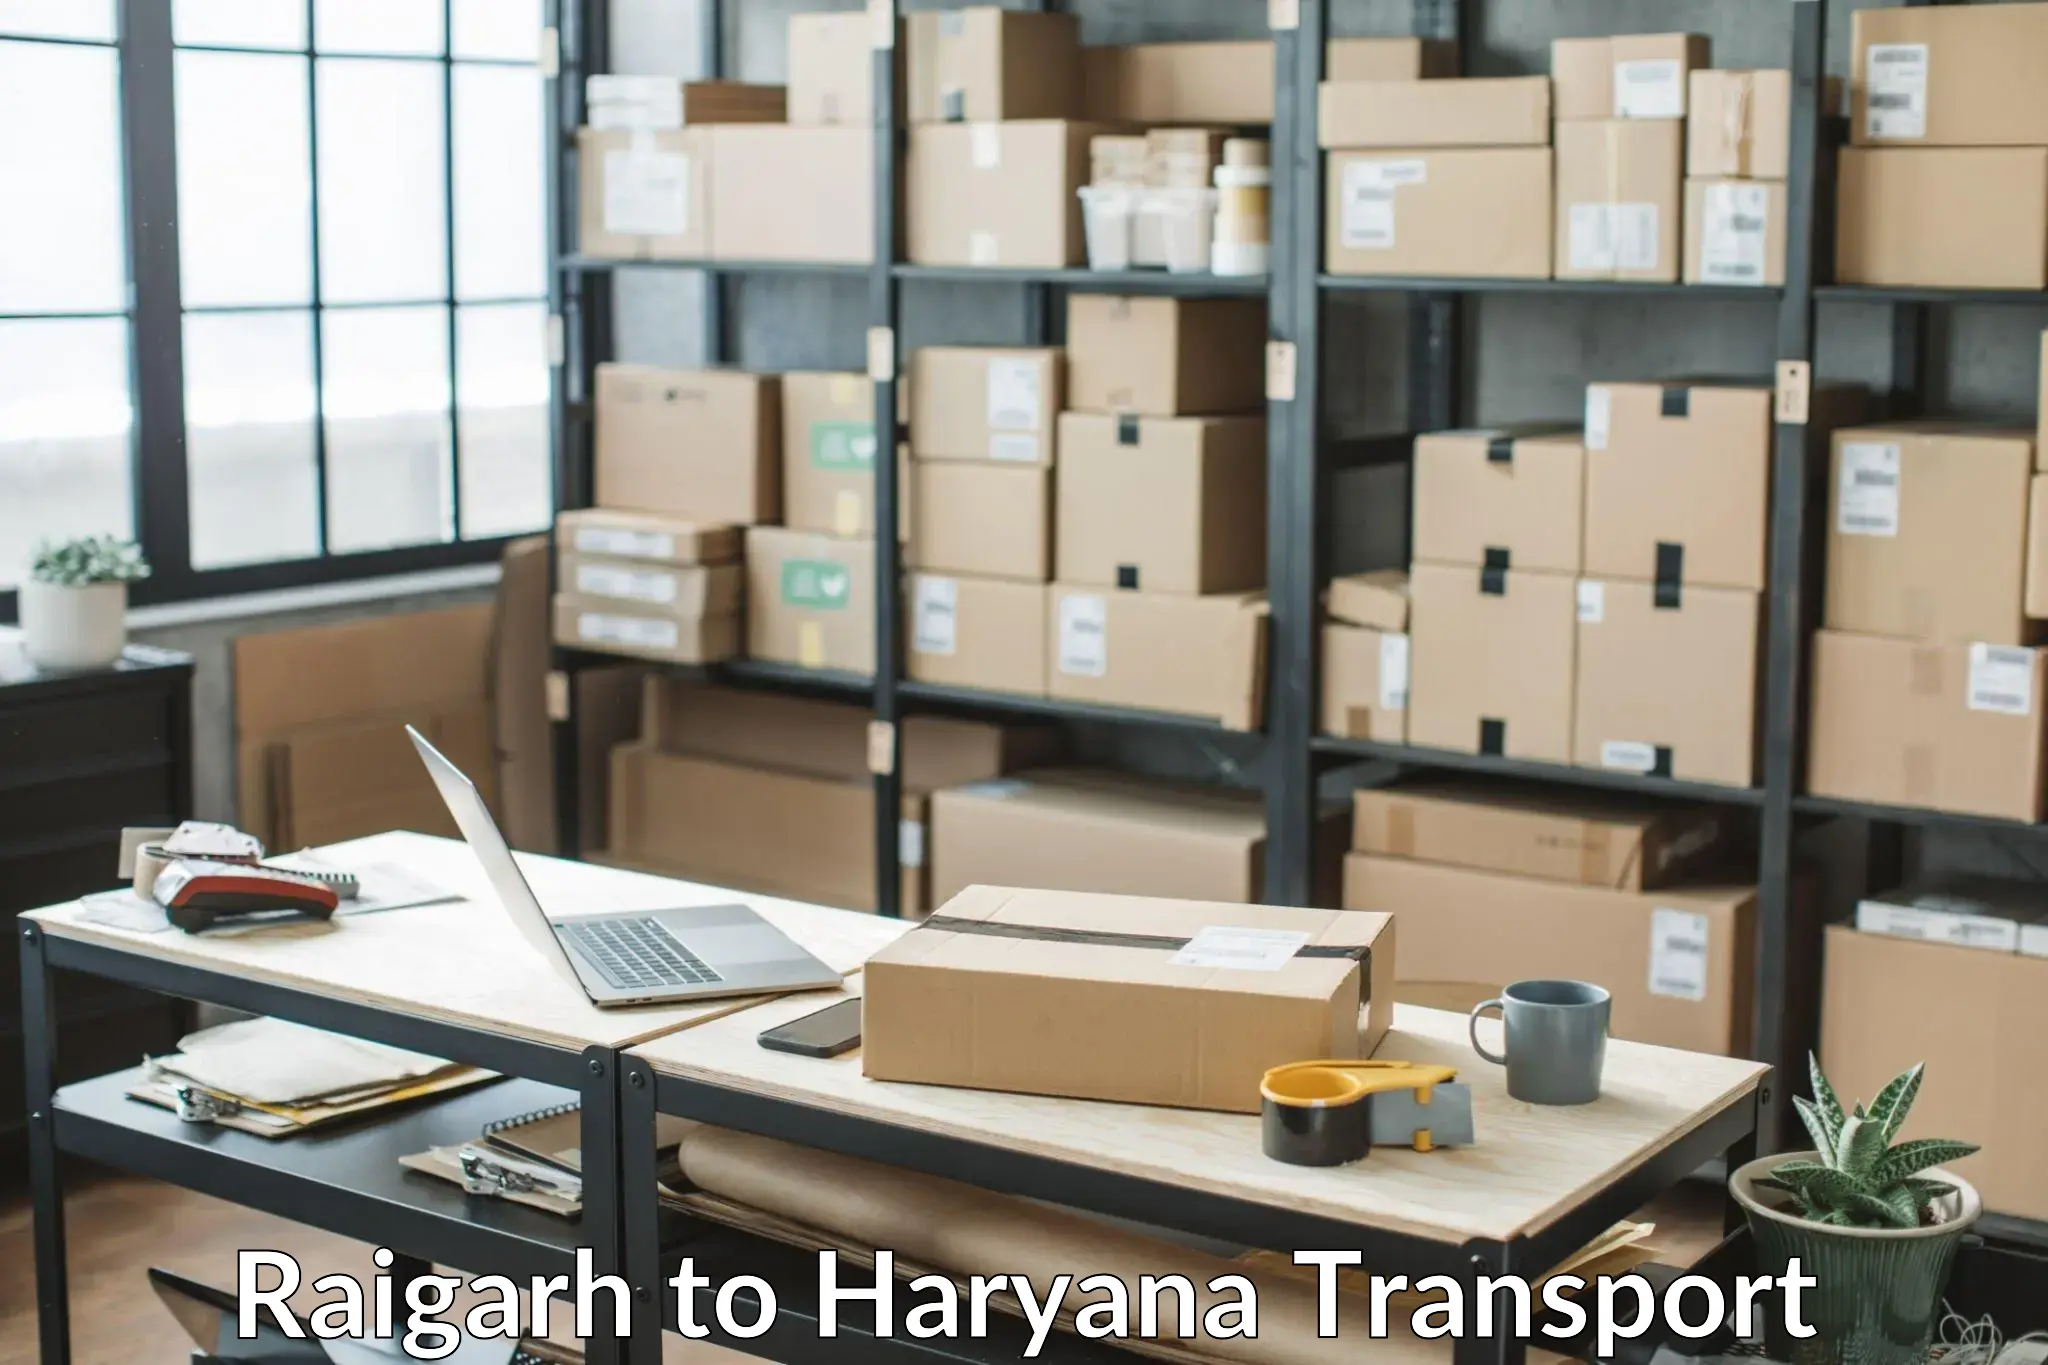 Express transport services in Raigarh to Jhajjar